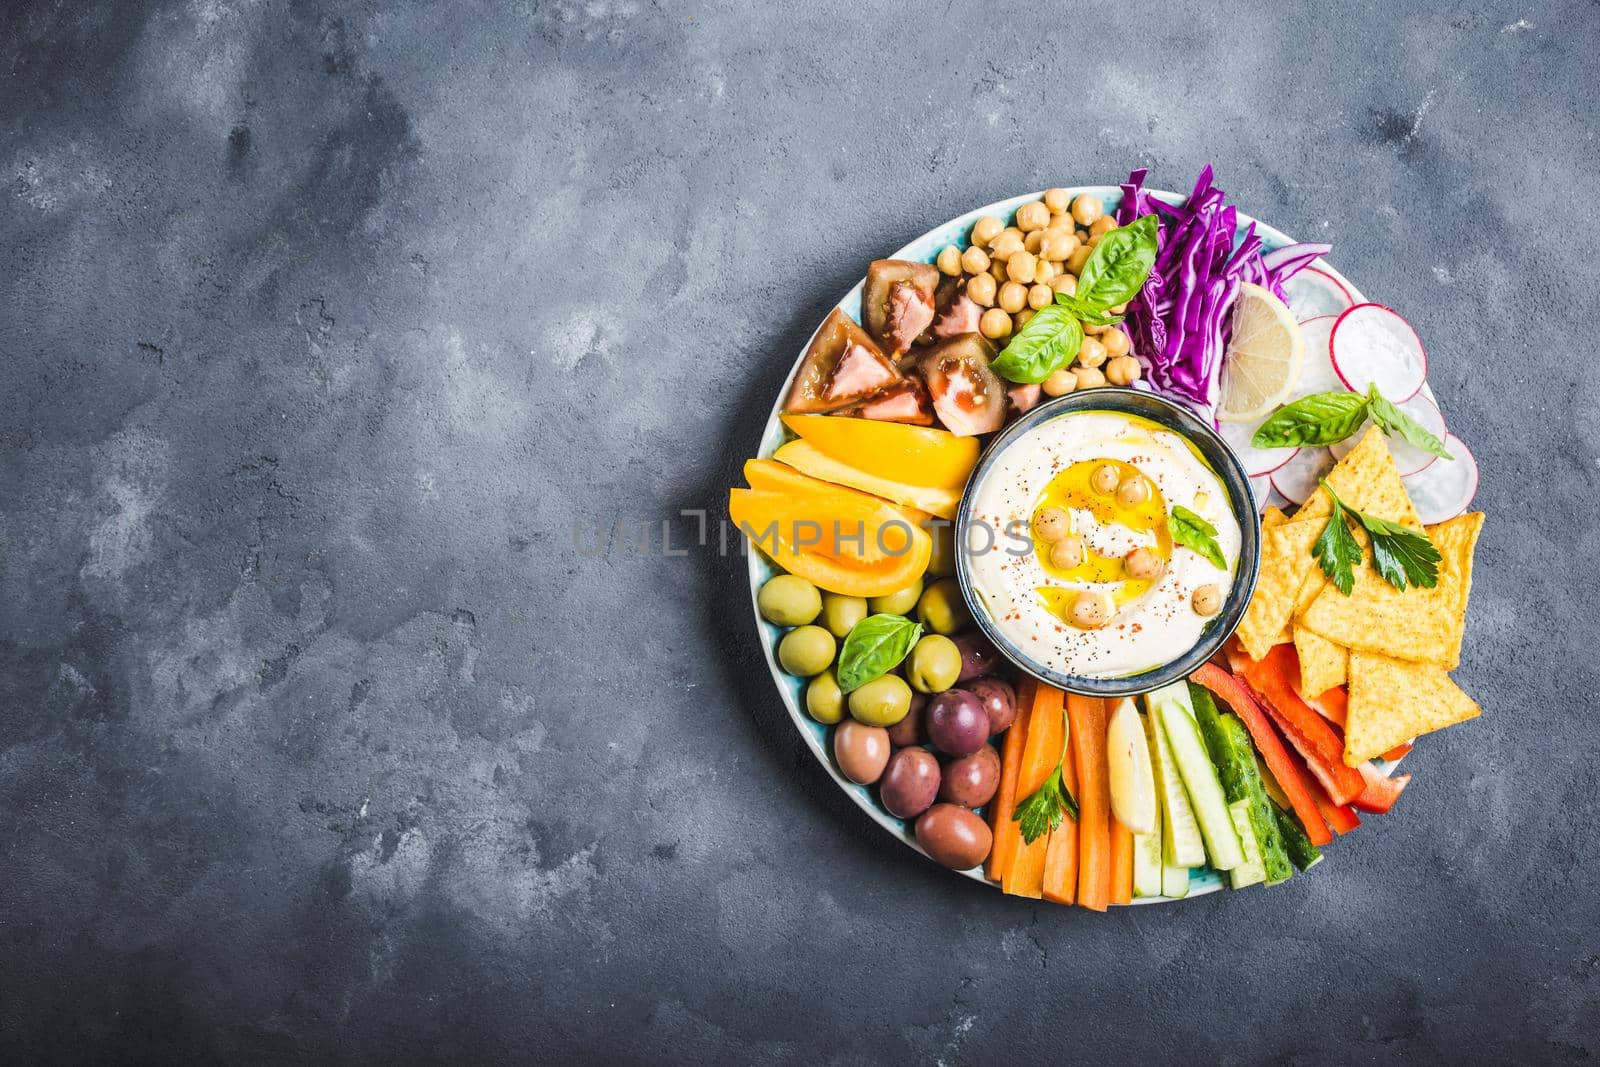 Hummus platter with assorted snacks, stone background. Space for text. Hummus, vegetables sticks, chickpeas, olives, pita chips. Plate, Middle Eastern/Mediterranean meze. Party/finger food. Top view